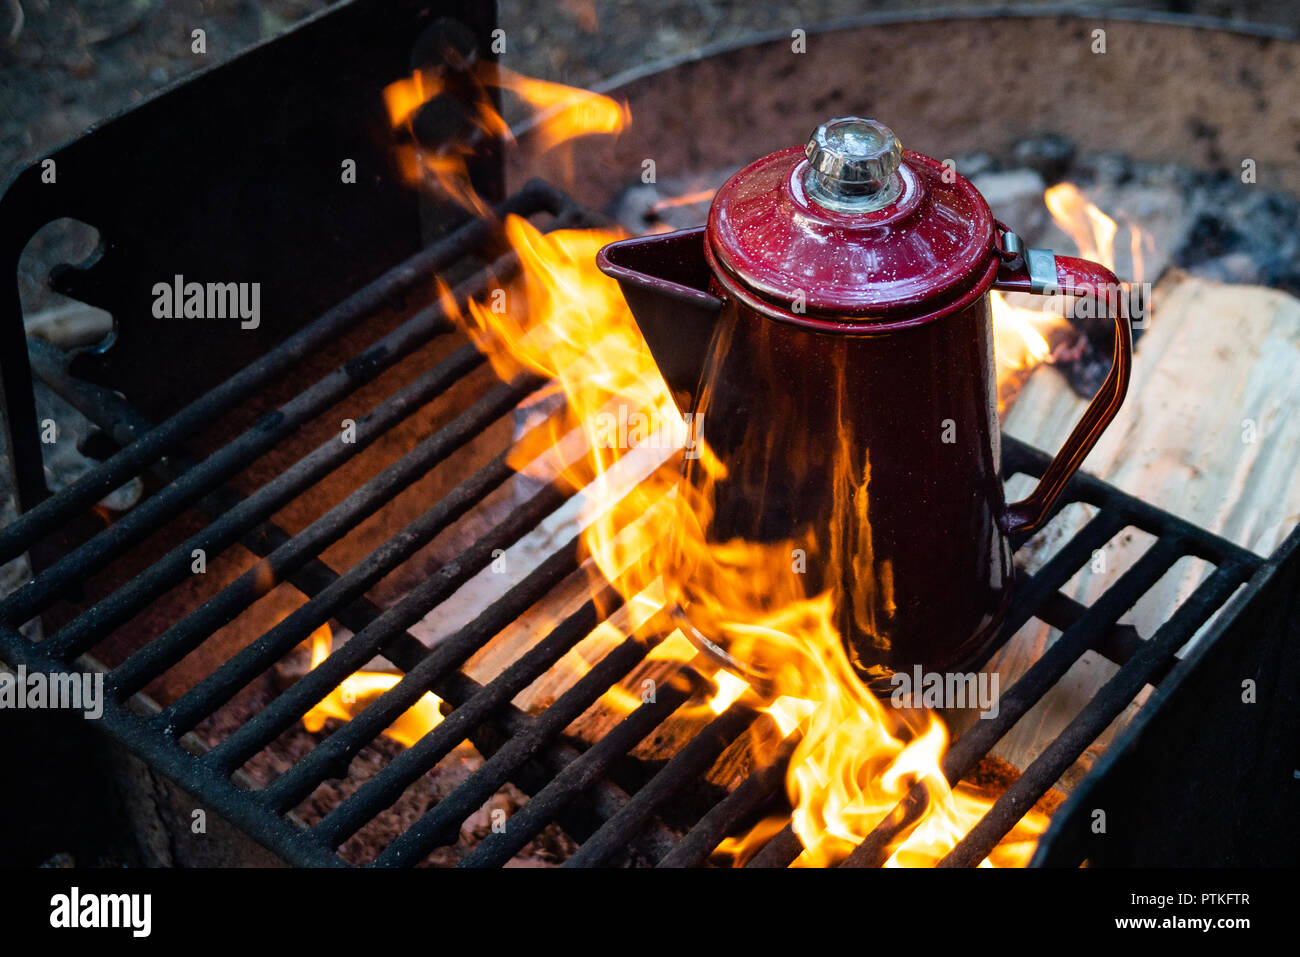 https://c8.alamy.com/comp/PTKFTR/enjoying-a-cup-of-coffee-over-a-campfire-in-the-early-morning-at-sunrise-while-camping-at-lake-crescent-in-washington-PTKFTR.jpg